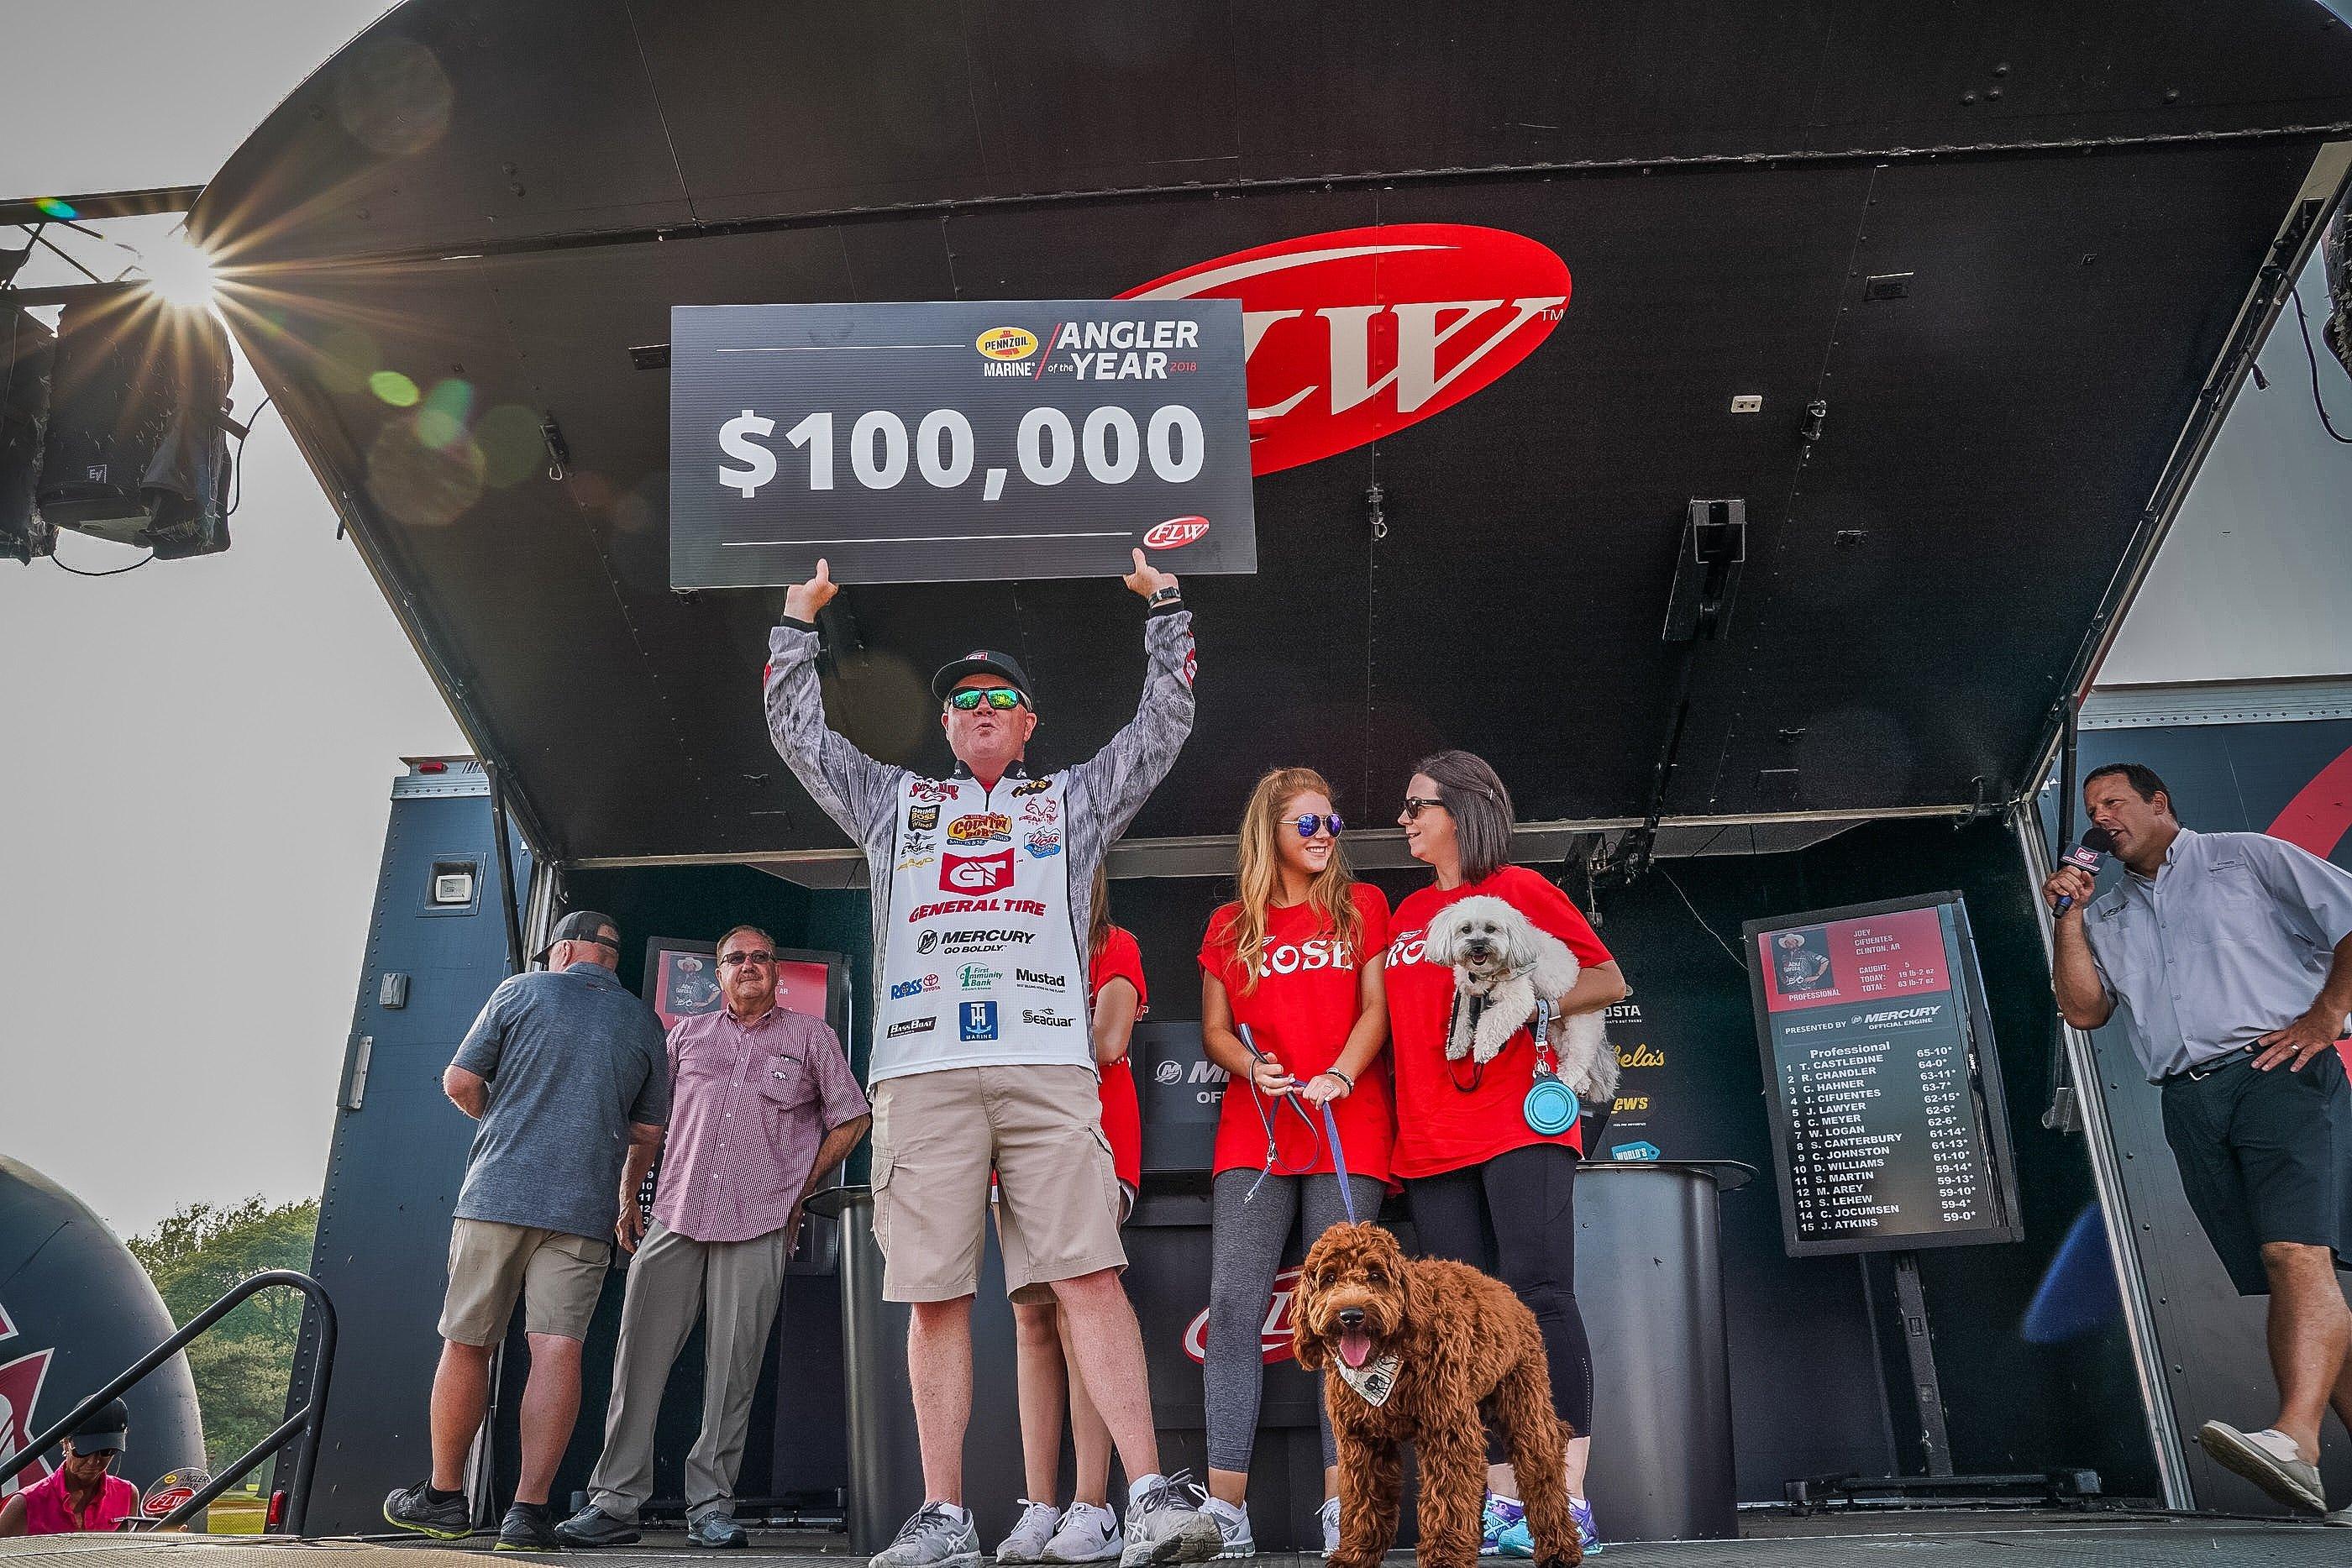 Mark Rose FLW Angler of the Year. Photo by Andy Hagedon